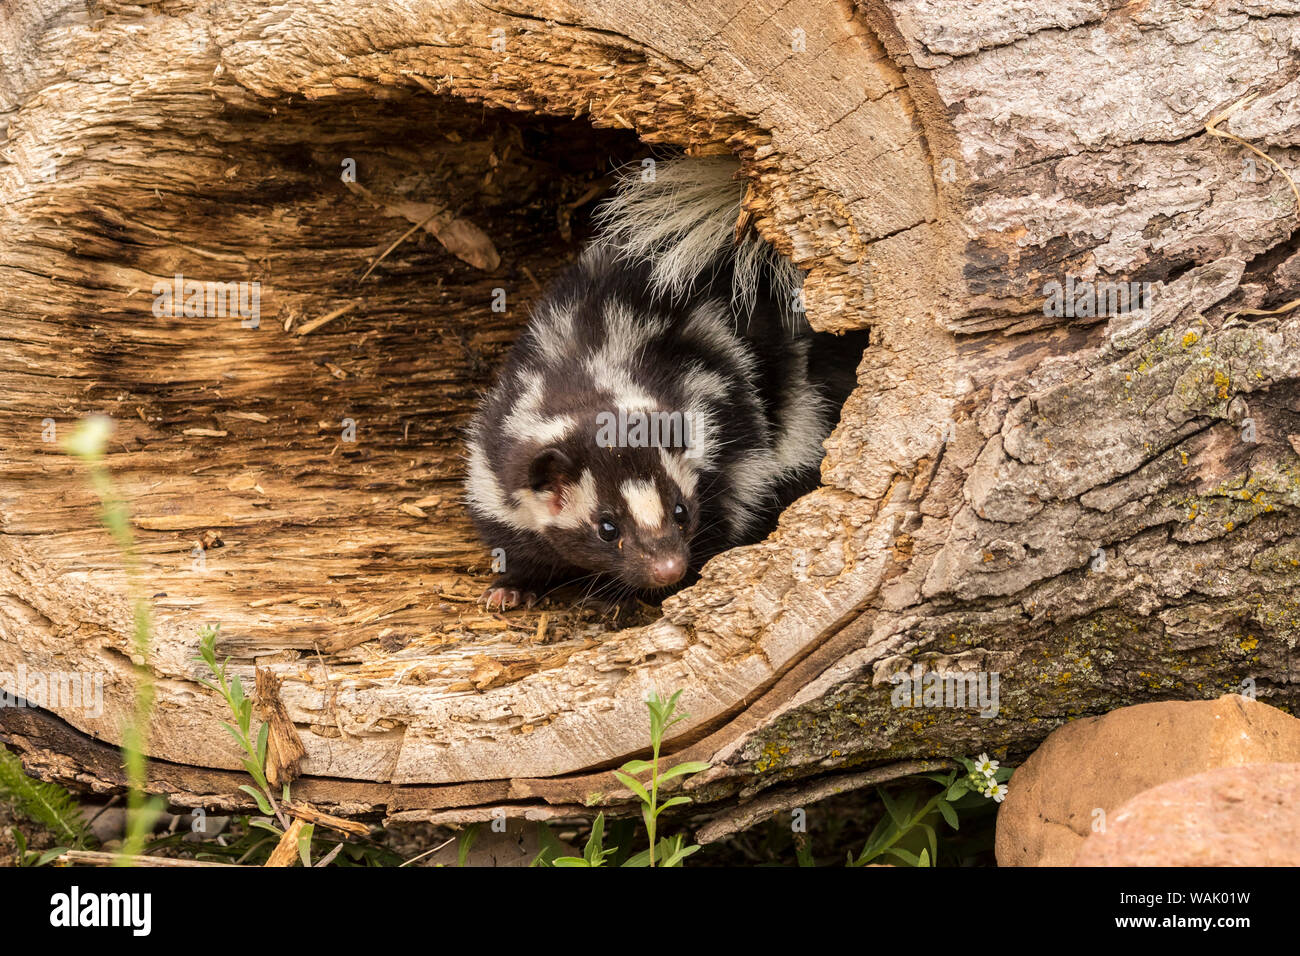 Pine County. Captive spotted skunk. Credit as: Cathy and Gordon Illg / Jaynes Gallery / DanitaDelimont.com Stock Photo